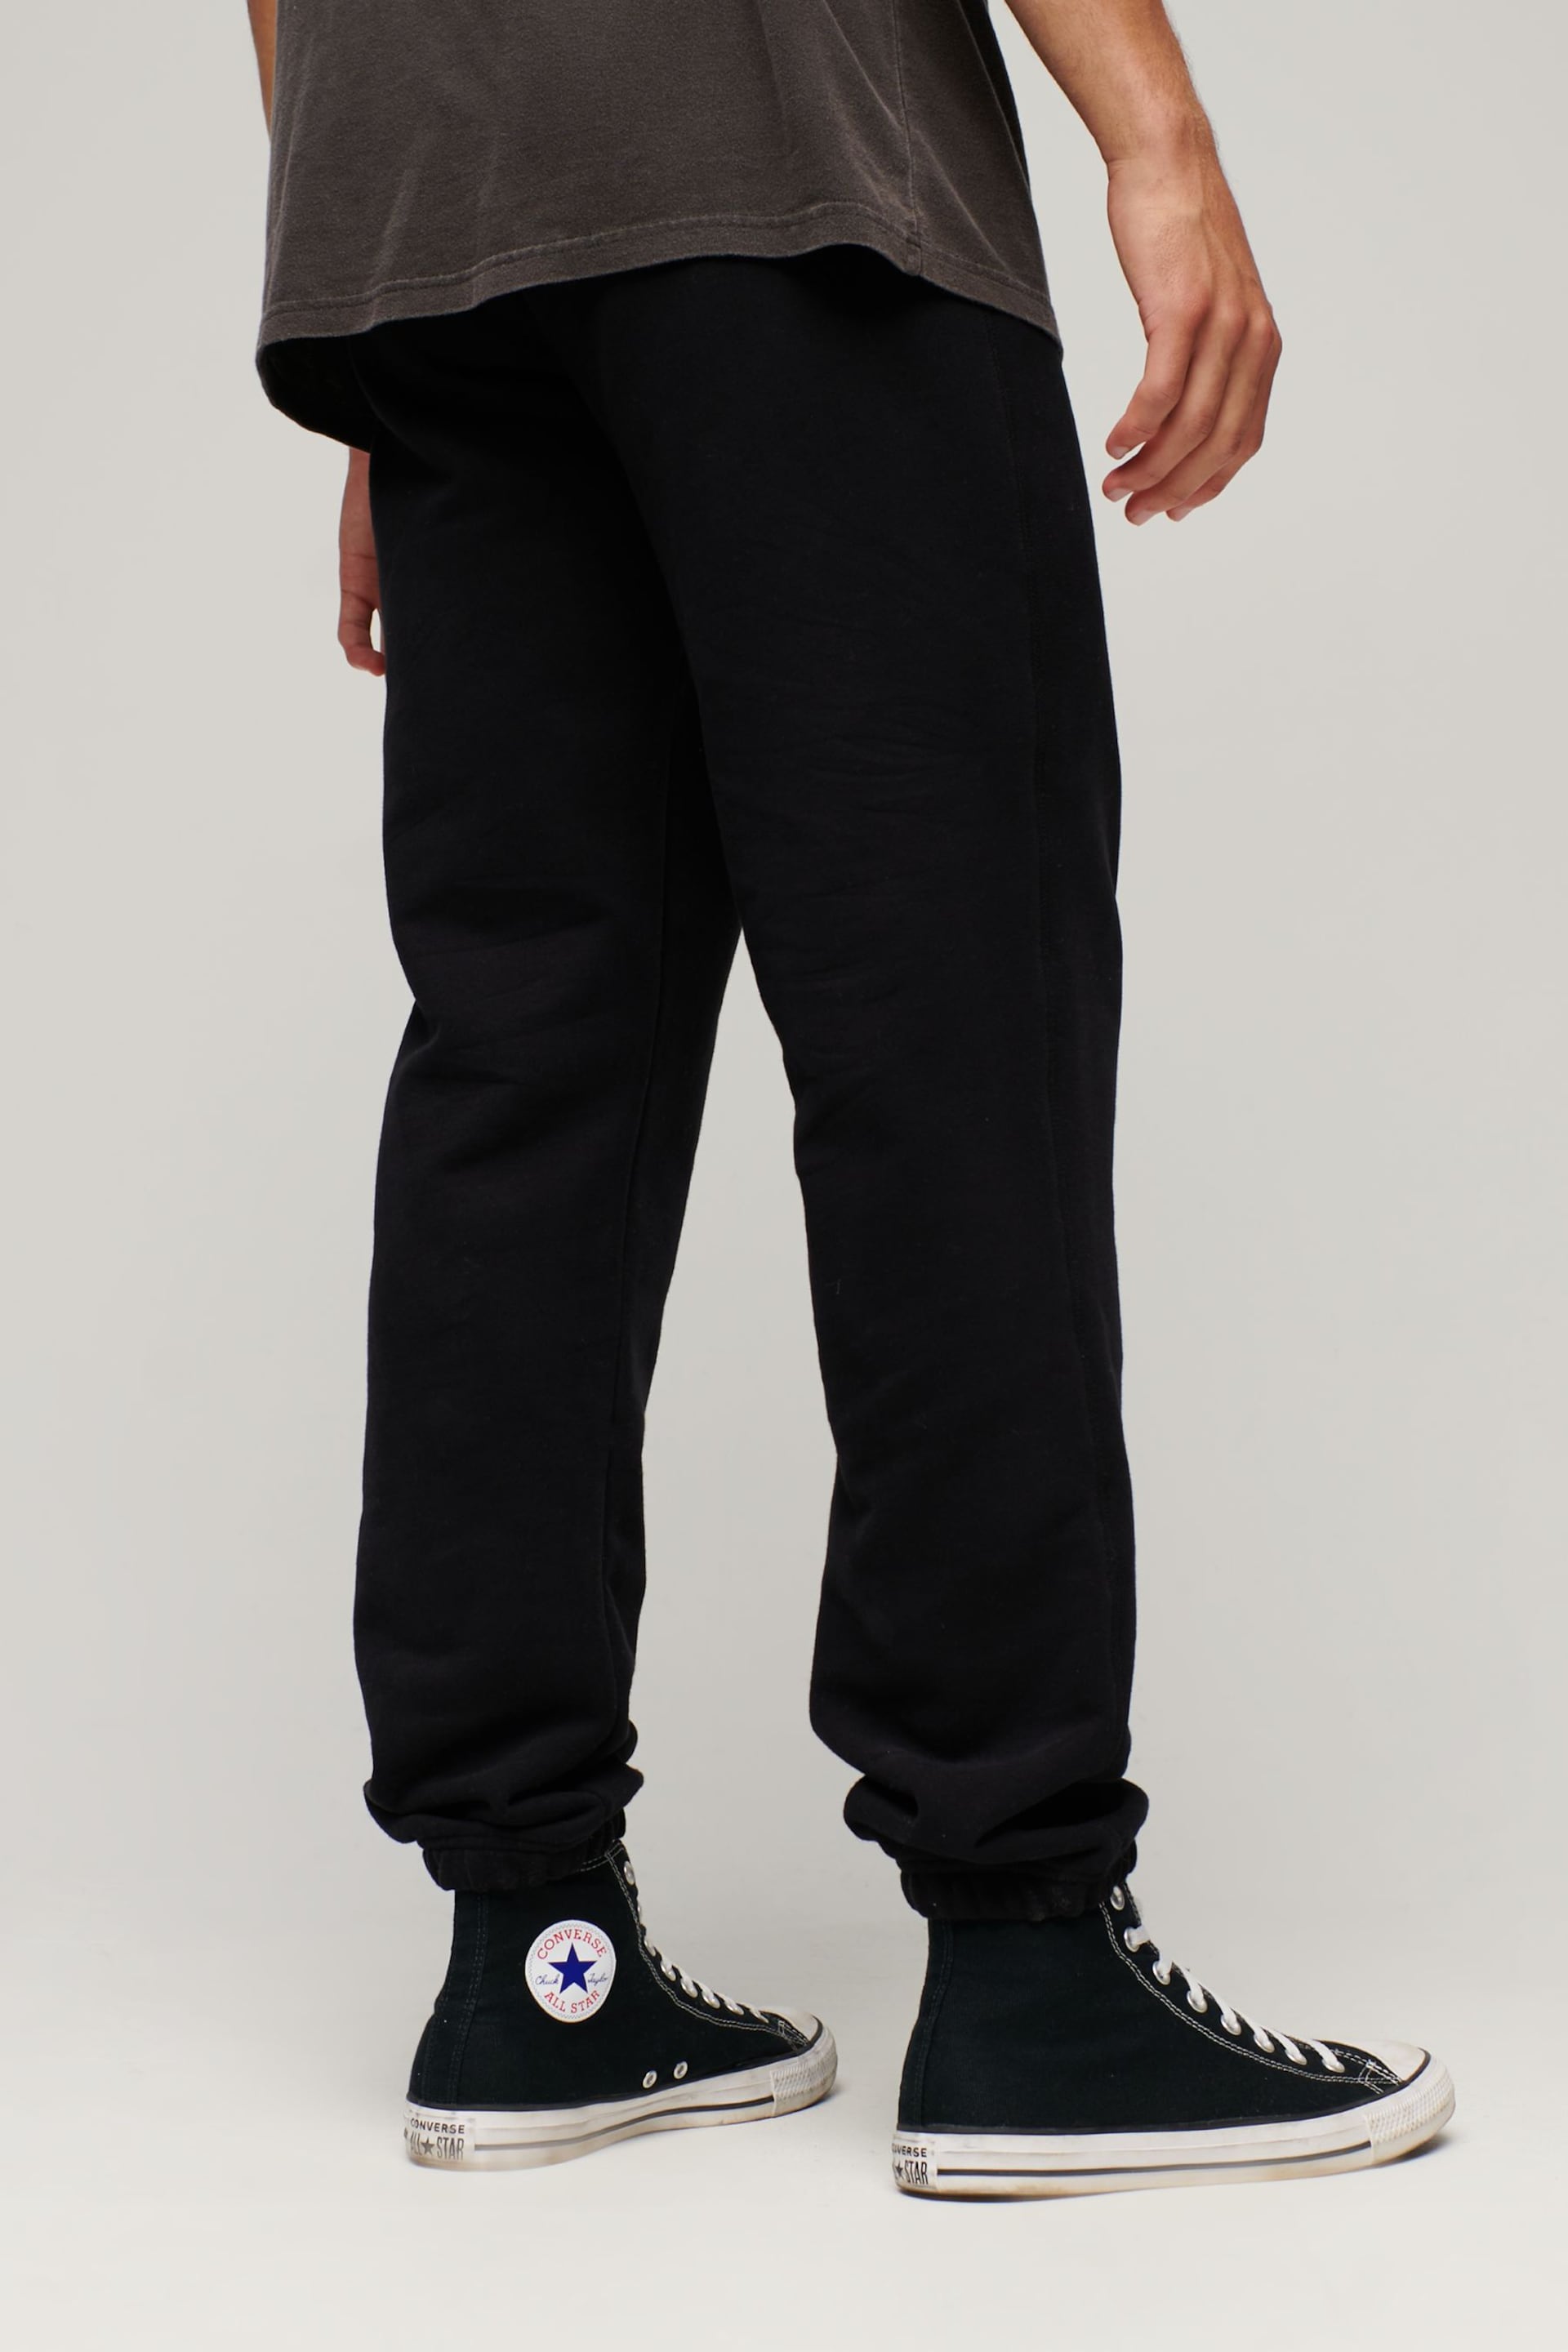 Superdry Black Sportswear Logo Tapered Joggers - Image 2 of 6